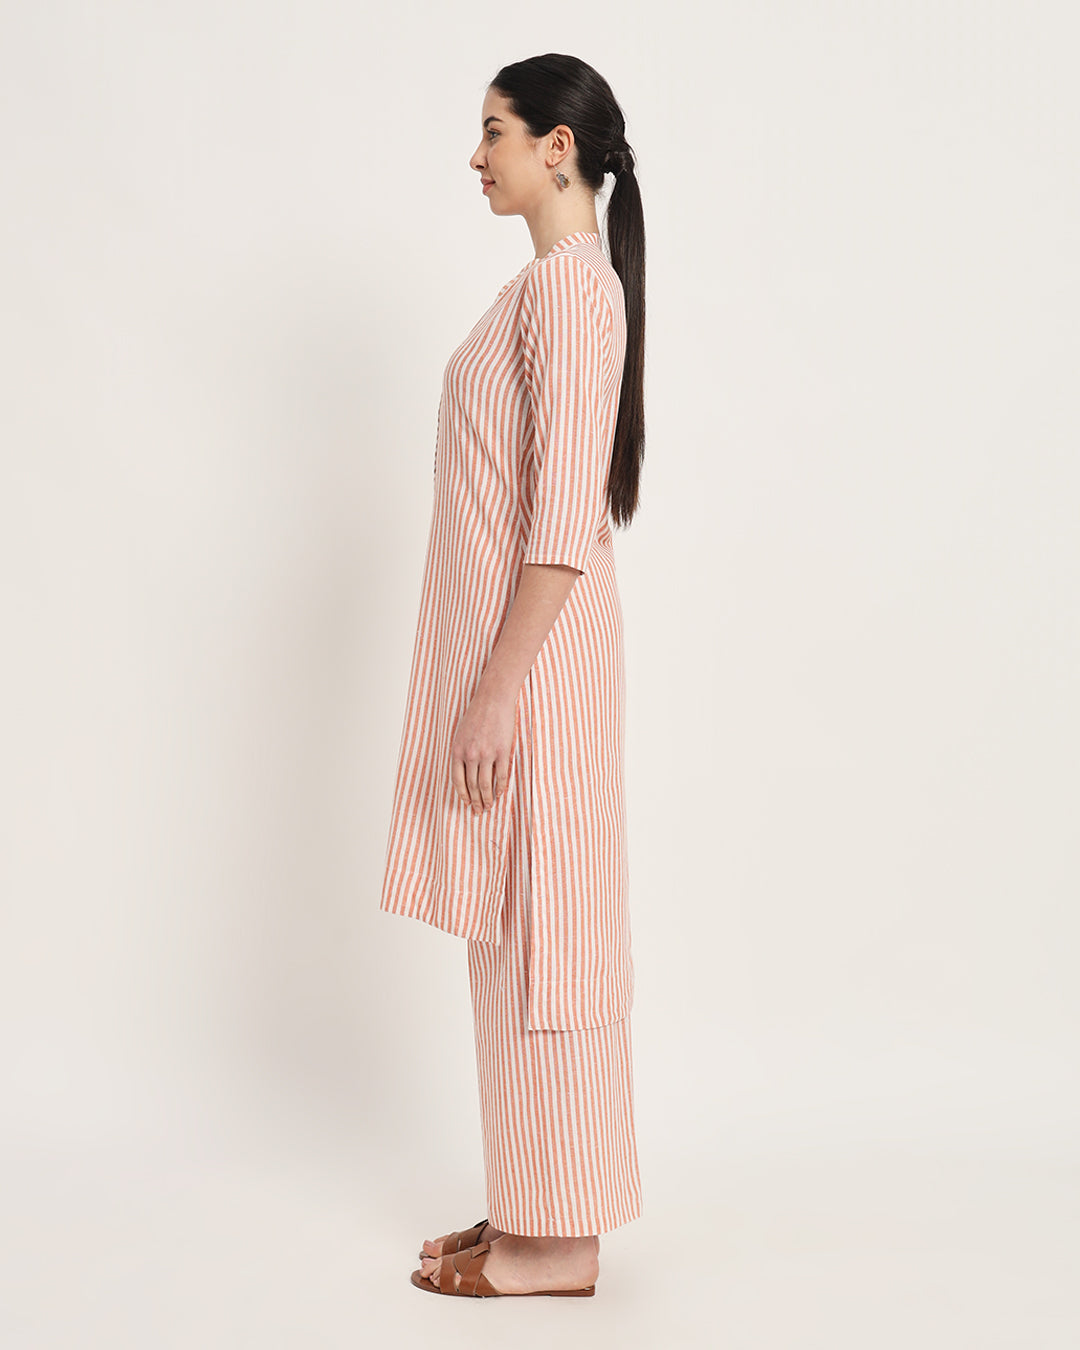 Rustic Charm Stripes High-Low Co-ord Set